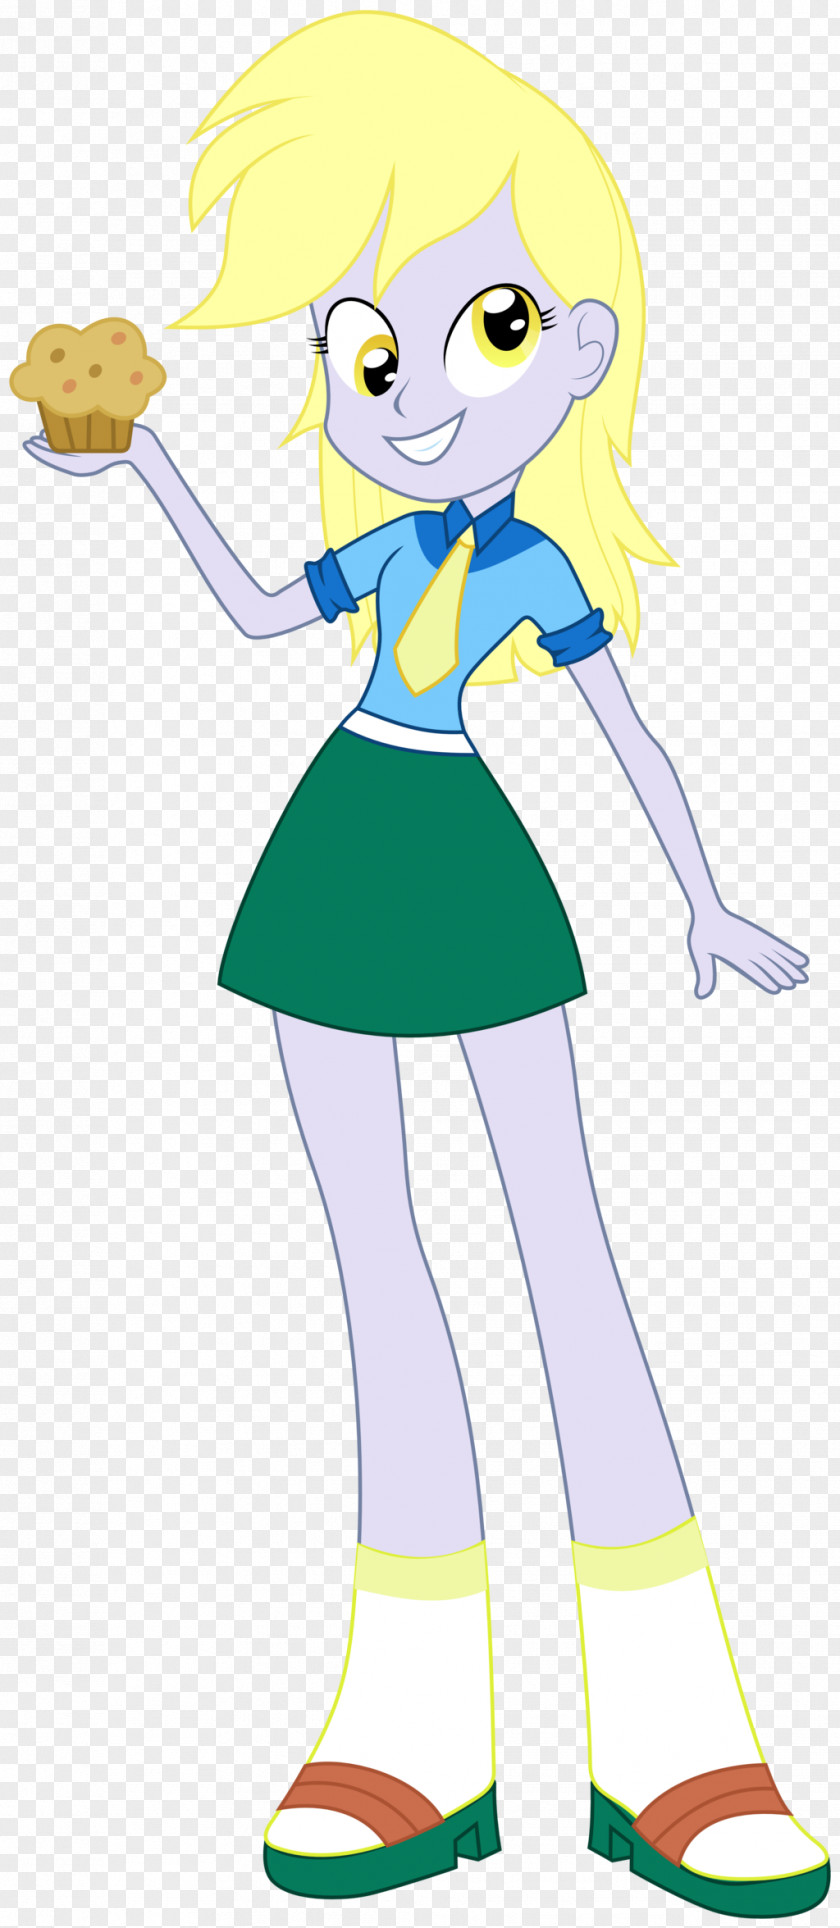 Skirt Vector Derpy Hooves My Little Pony: Equestria Girls PNG